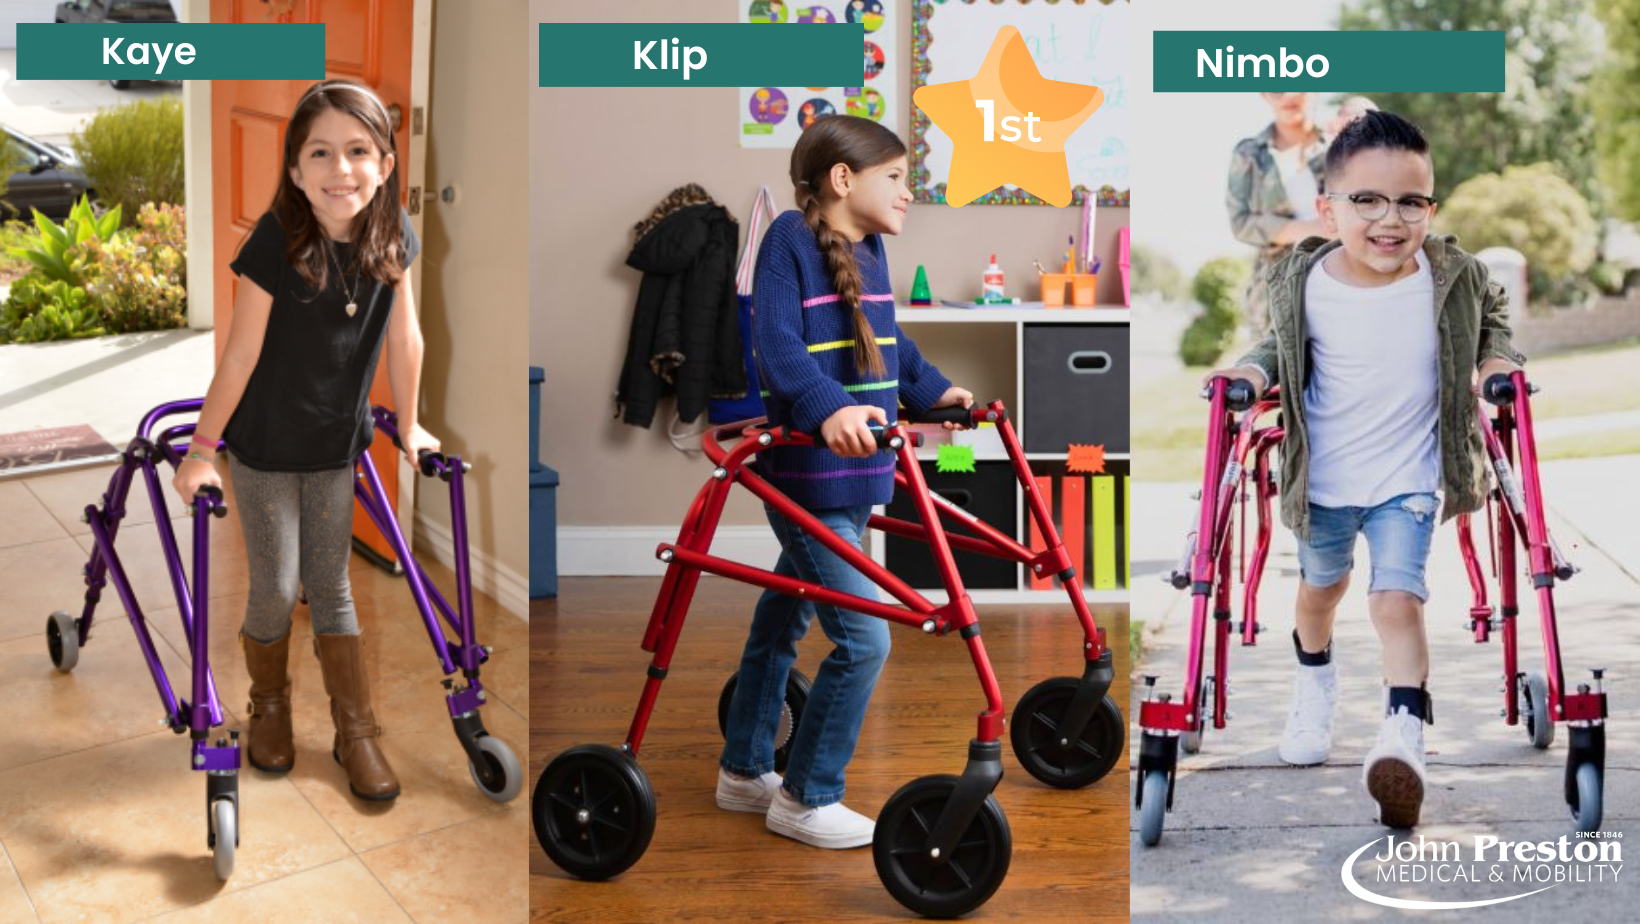 The Klip: a perfect alternative to the Nimbo and Kaye posture walkers